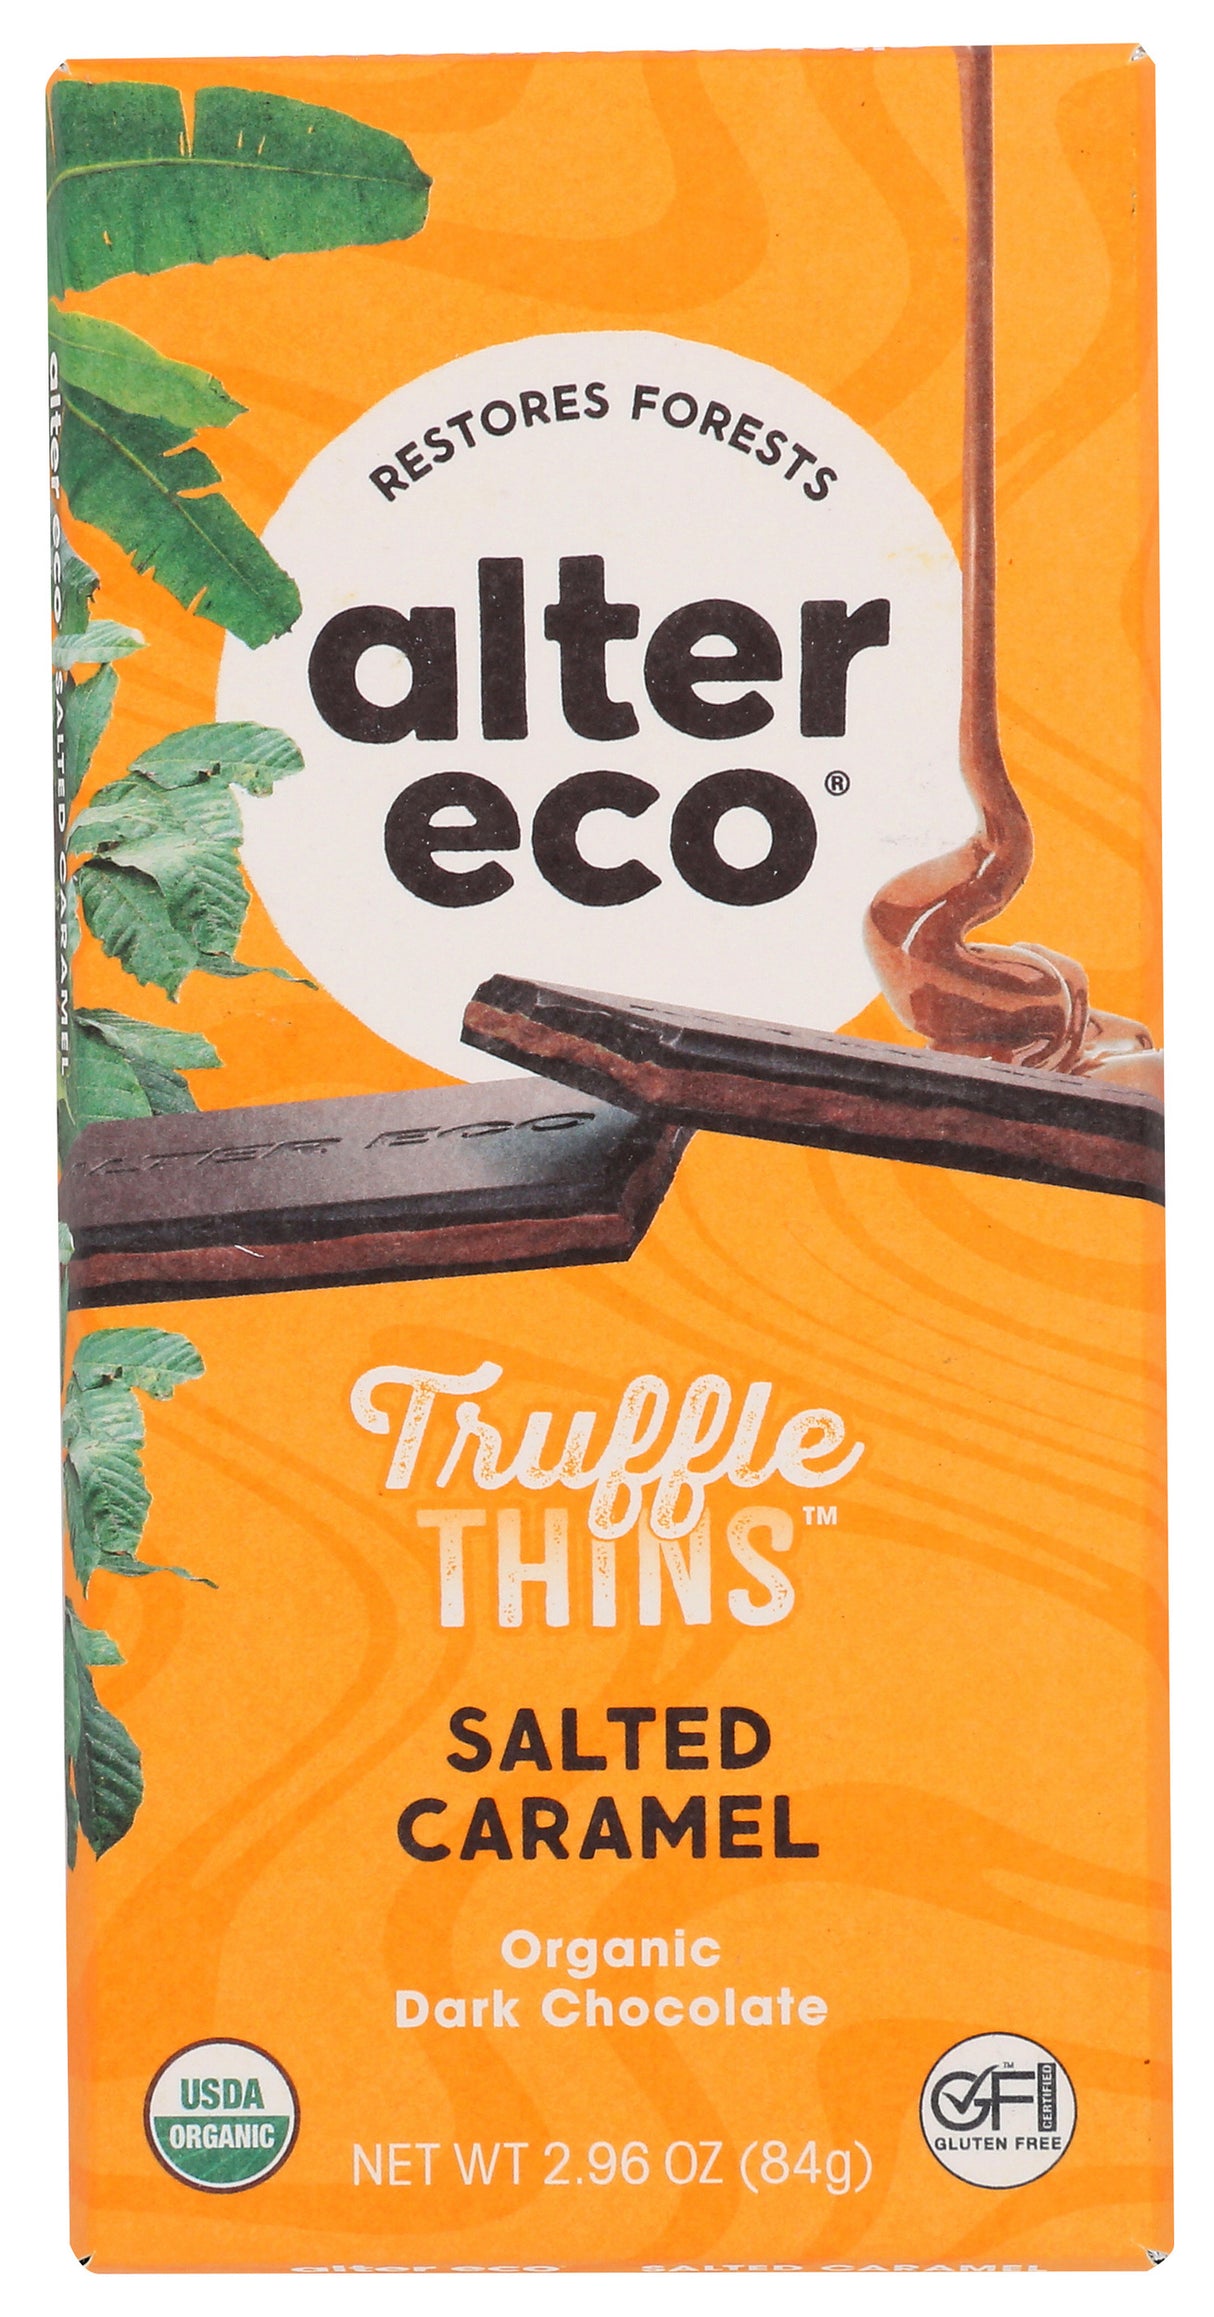 Alter Eco Organic Dark Chocolate Salted Caramel Truffle Thins Bar, 2.96 Ounce (Pack of 12)